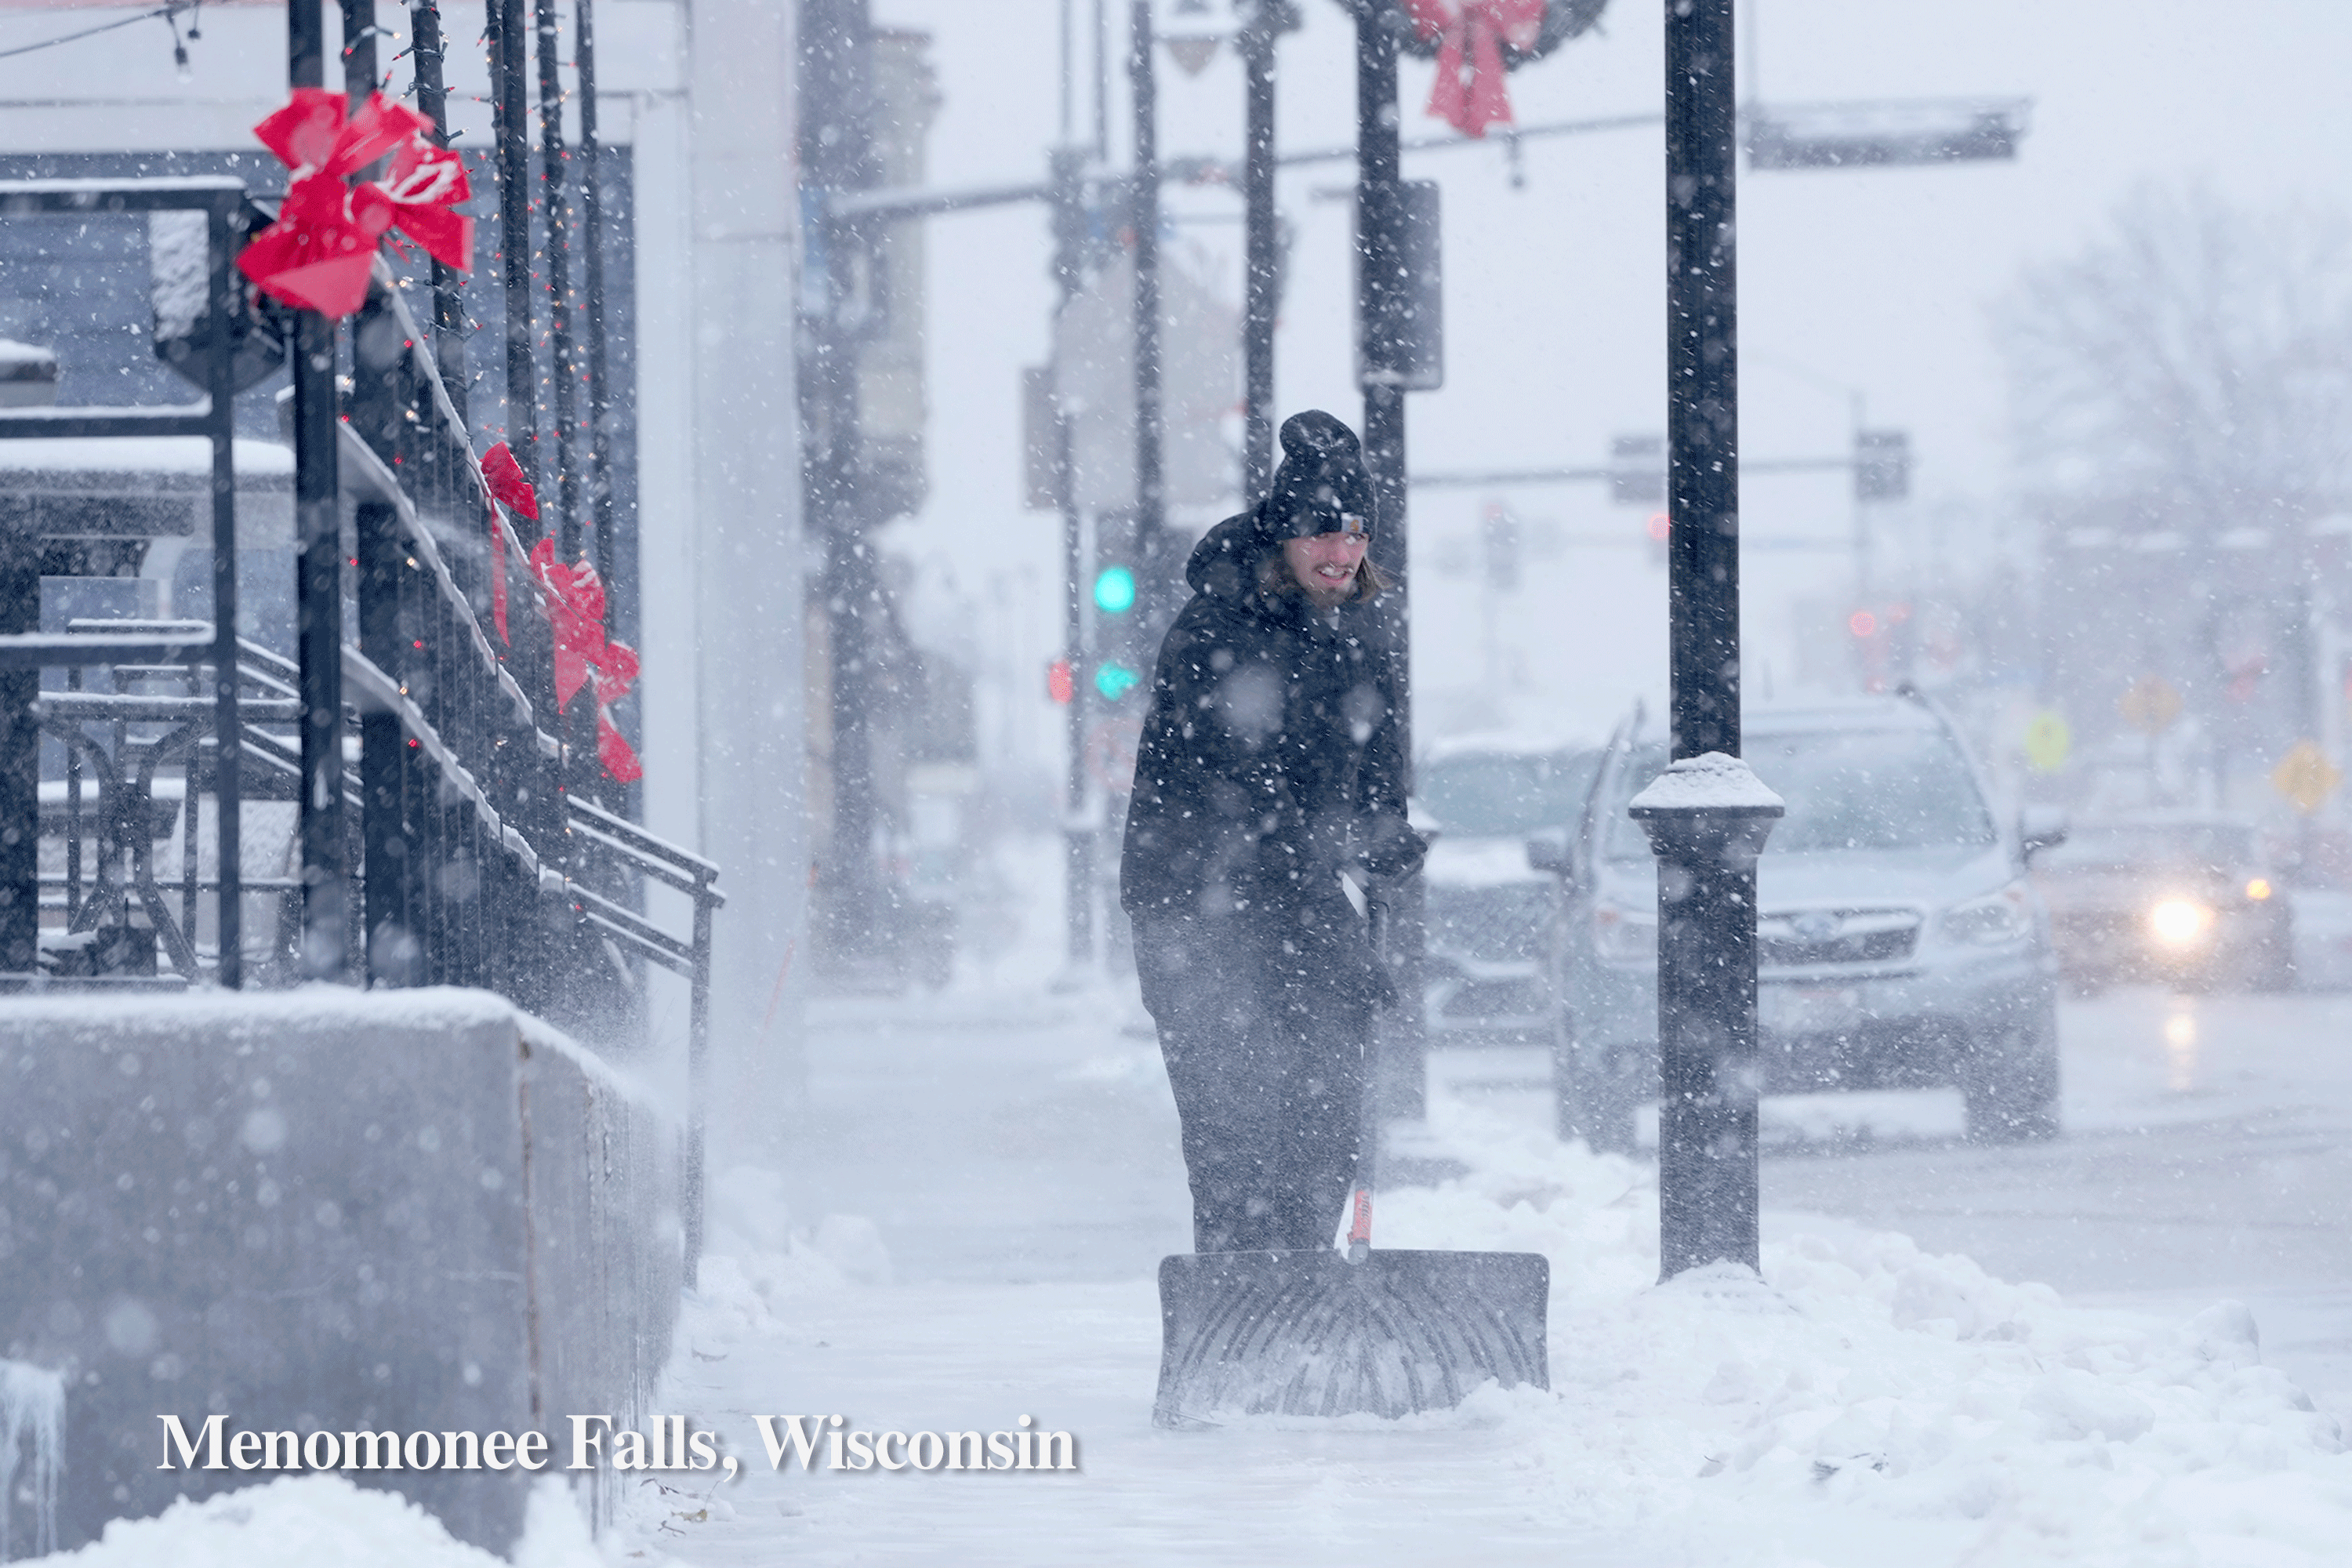 A person shovels snow in Menomonee Falls, Wisconsin, in contrast to a person along the coast in Long Beach.